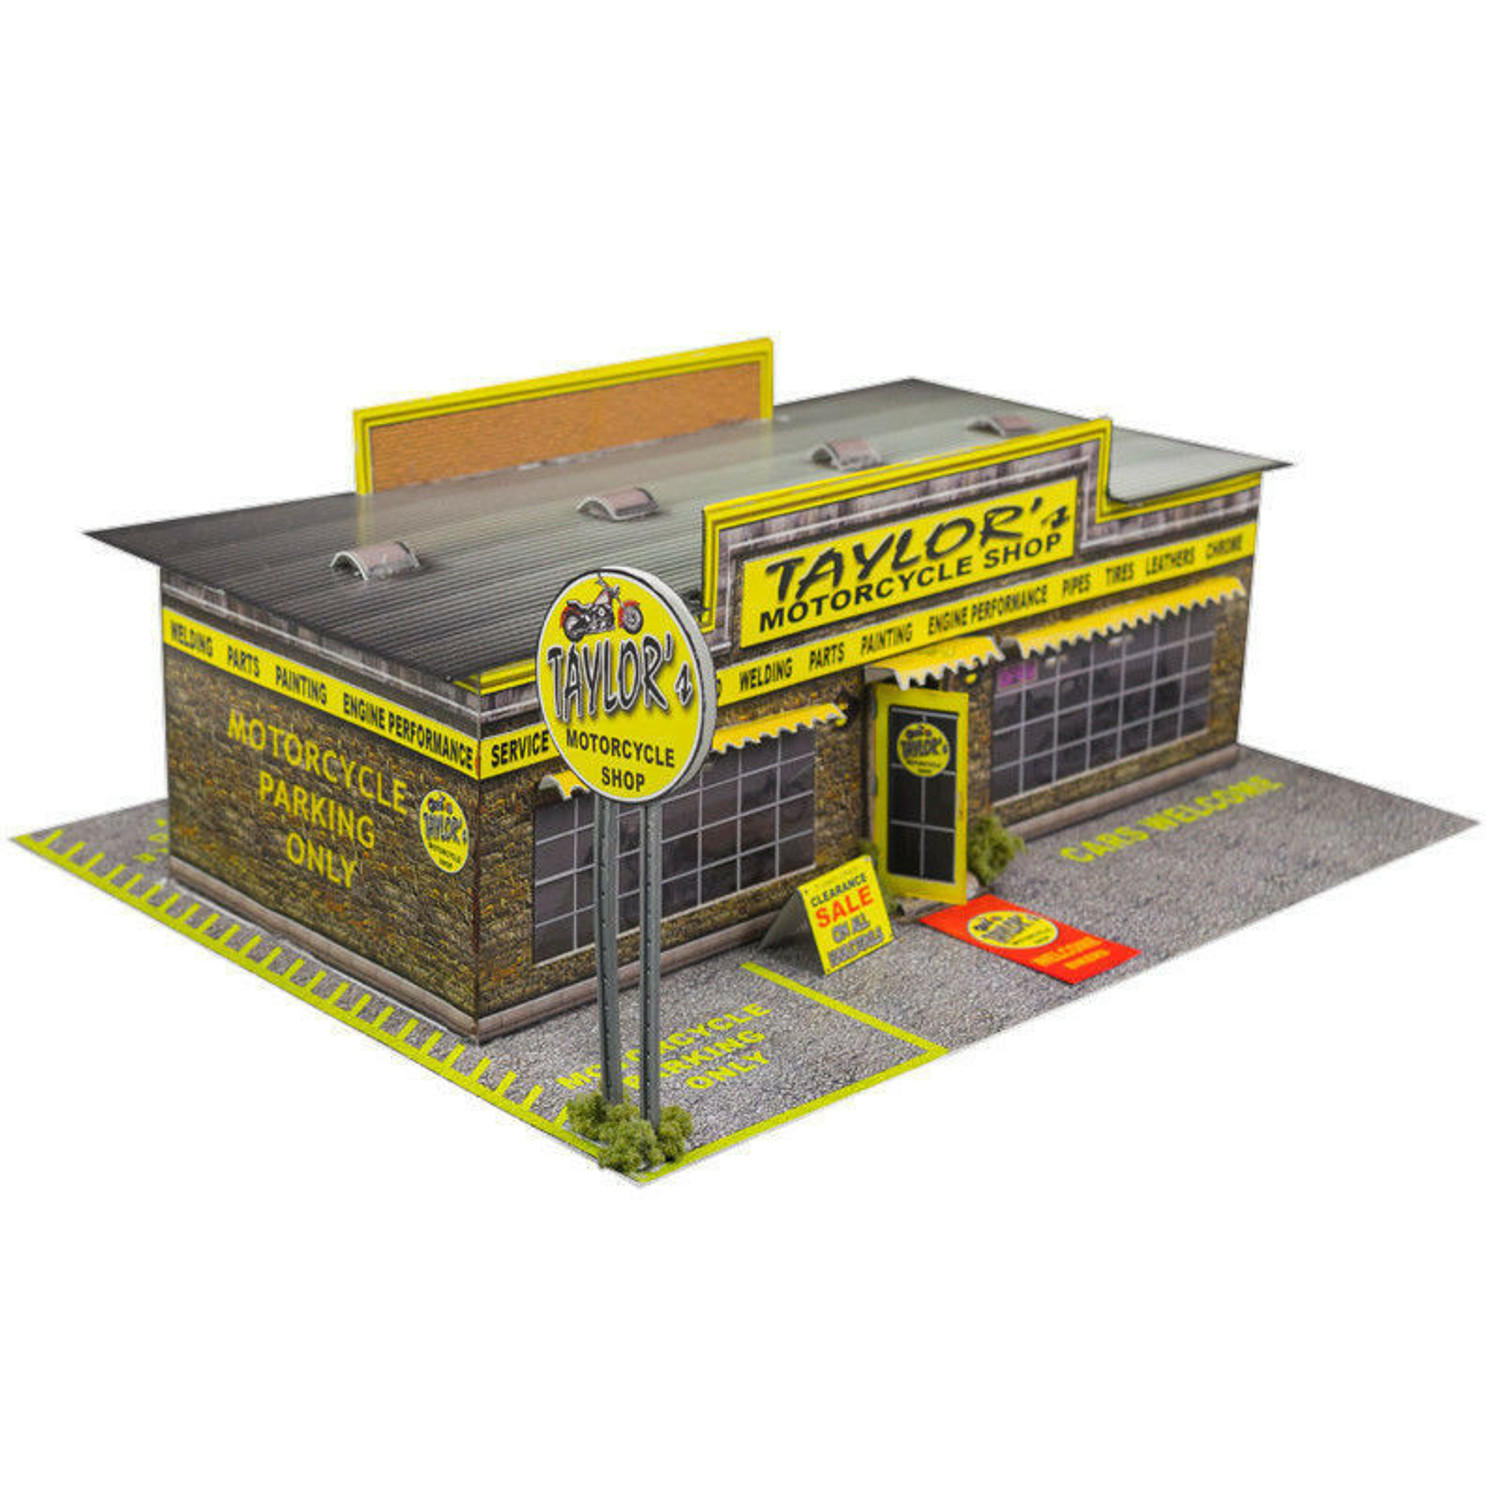 BK 6401 1:64 Scale "Motorcycle Shop" Photo Real Scale Building Kit